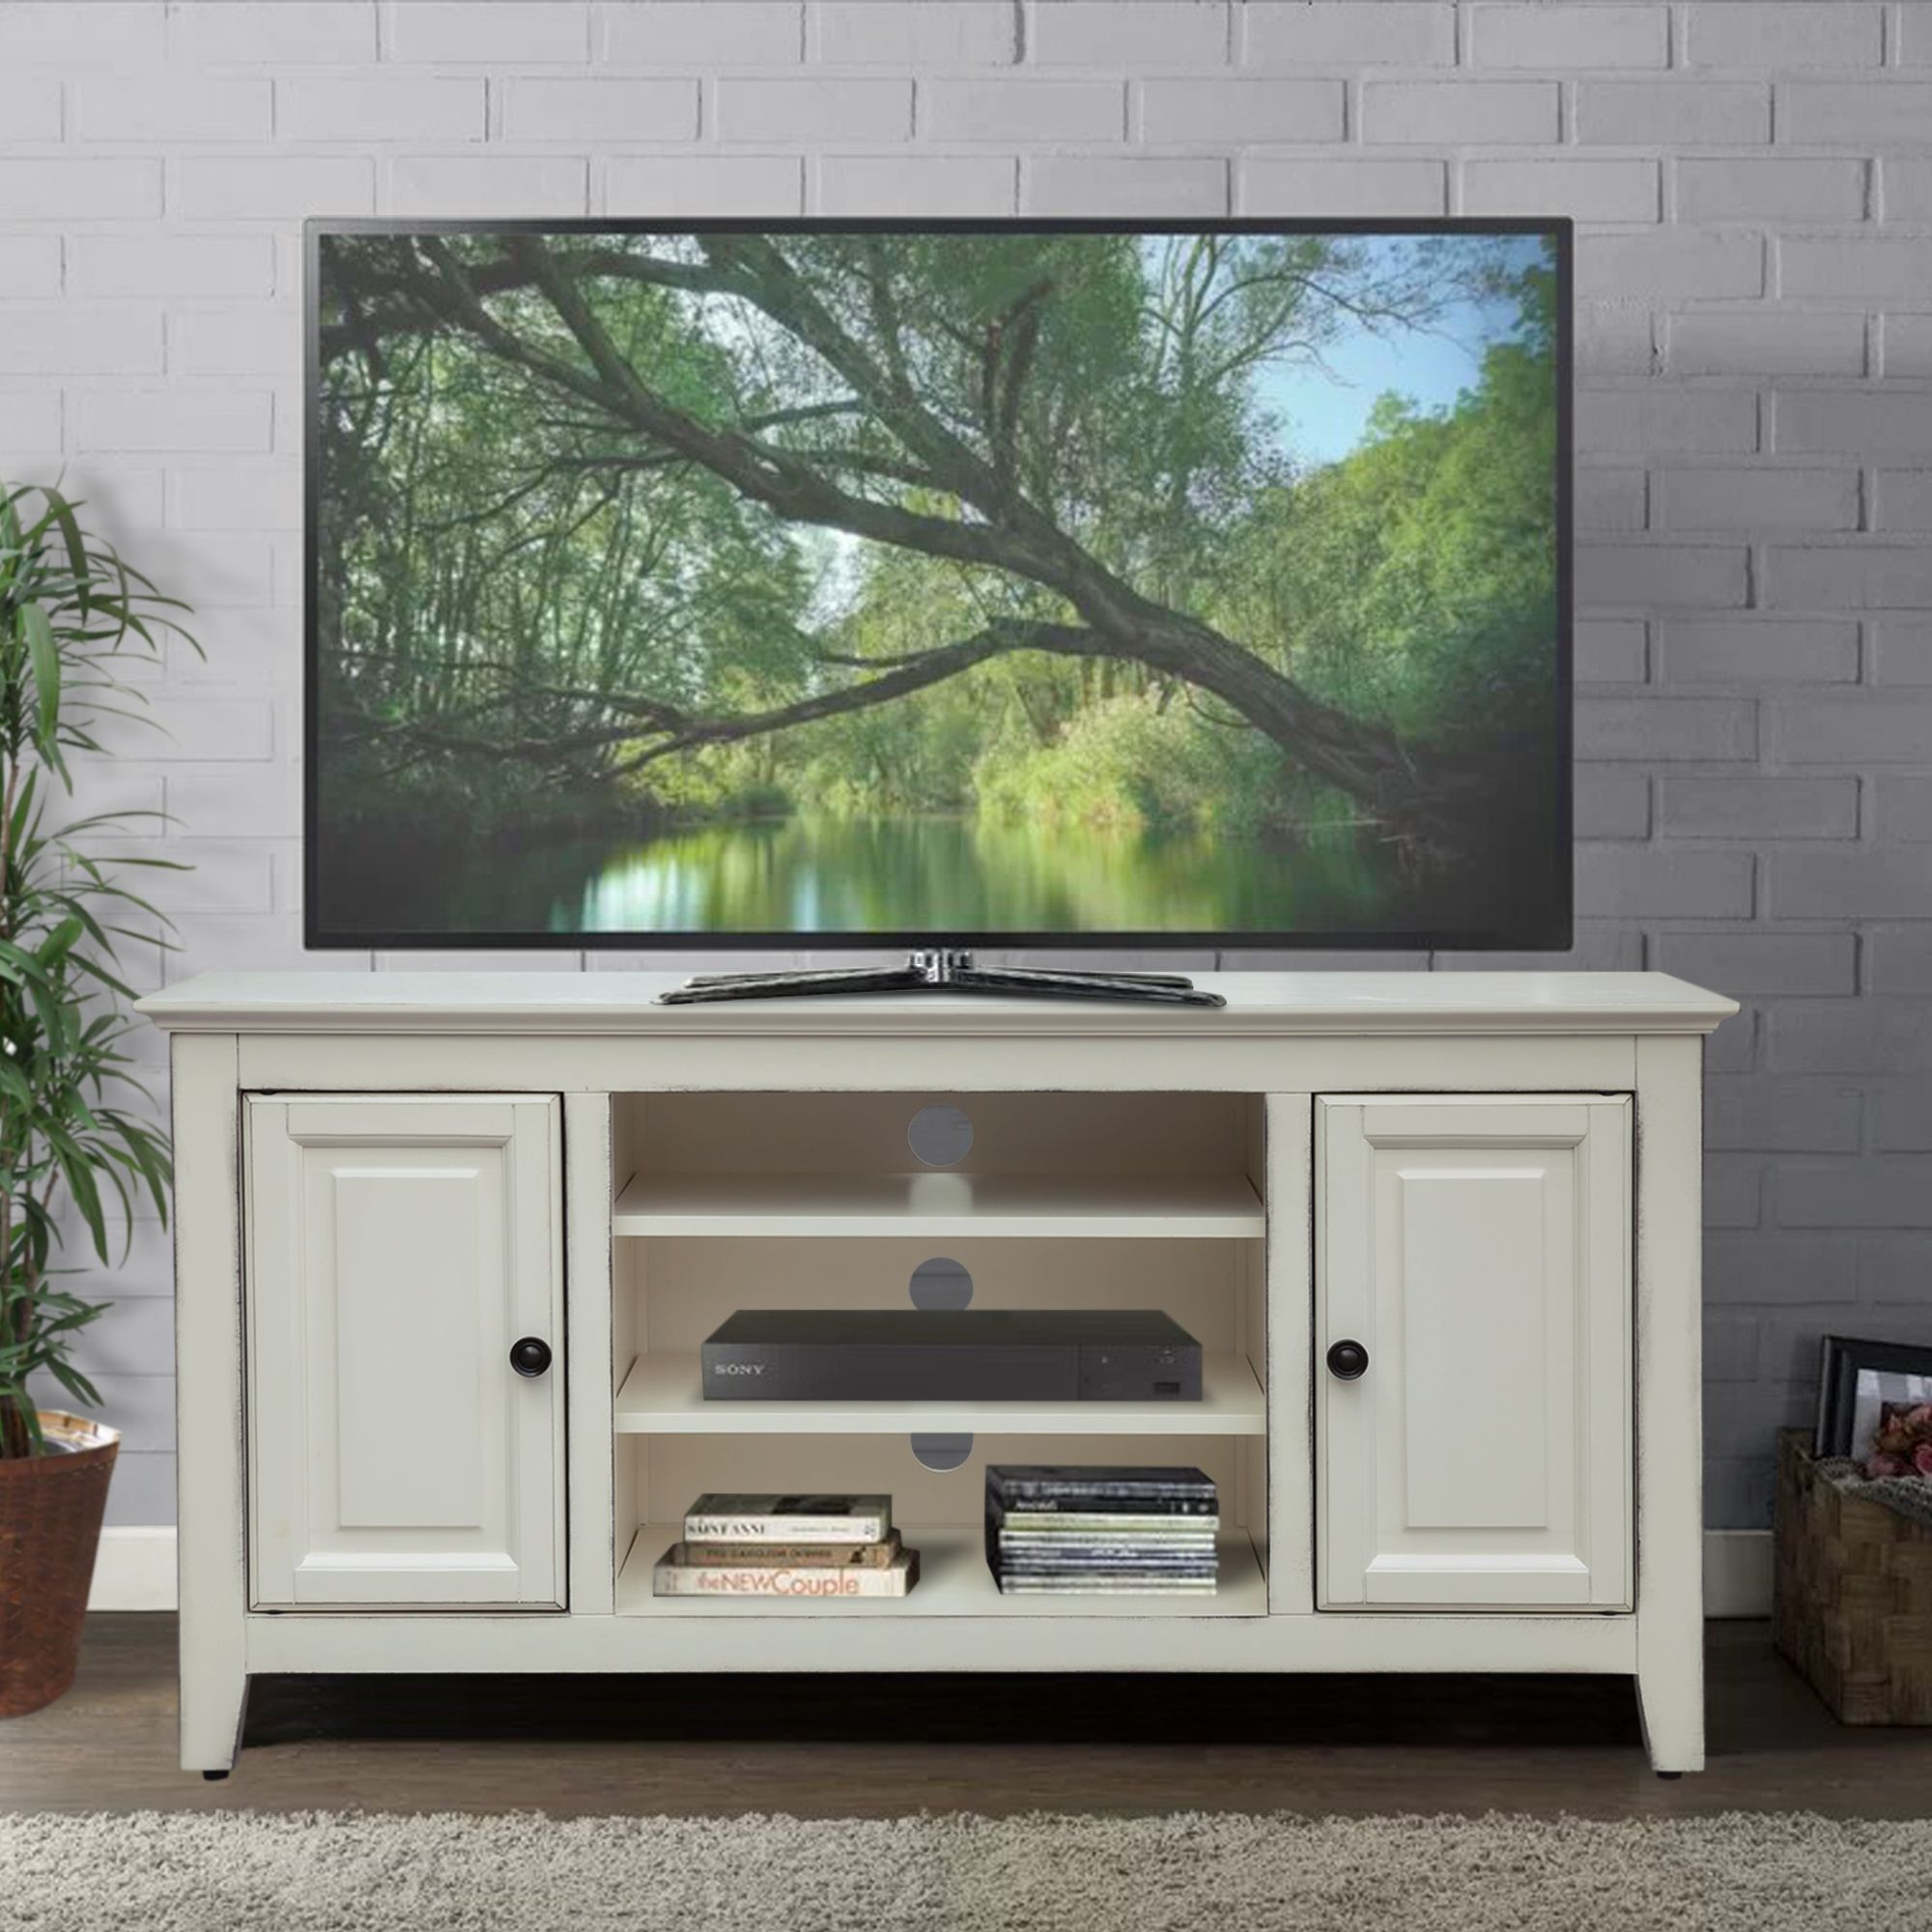 48" Wood Grain Tv Stand In Antique White – Walmart For Opod Tv Stand White (View 7 of 15)